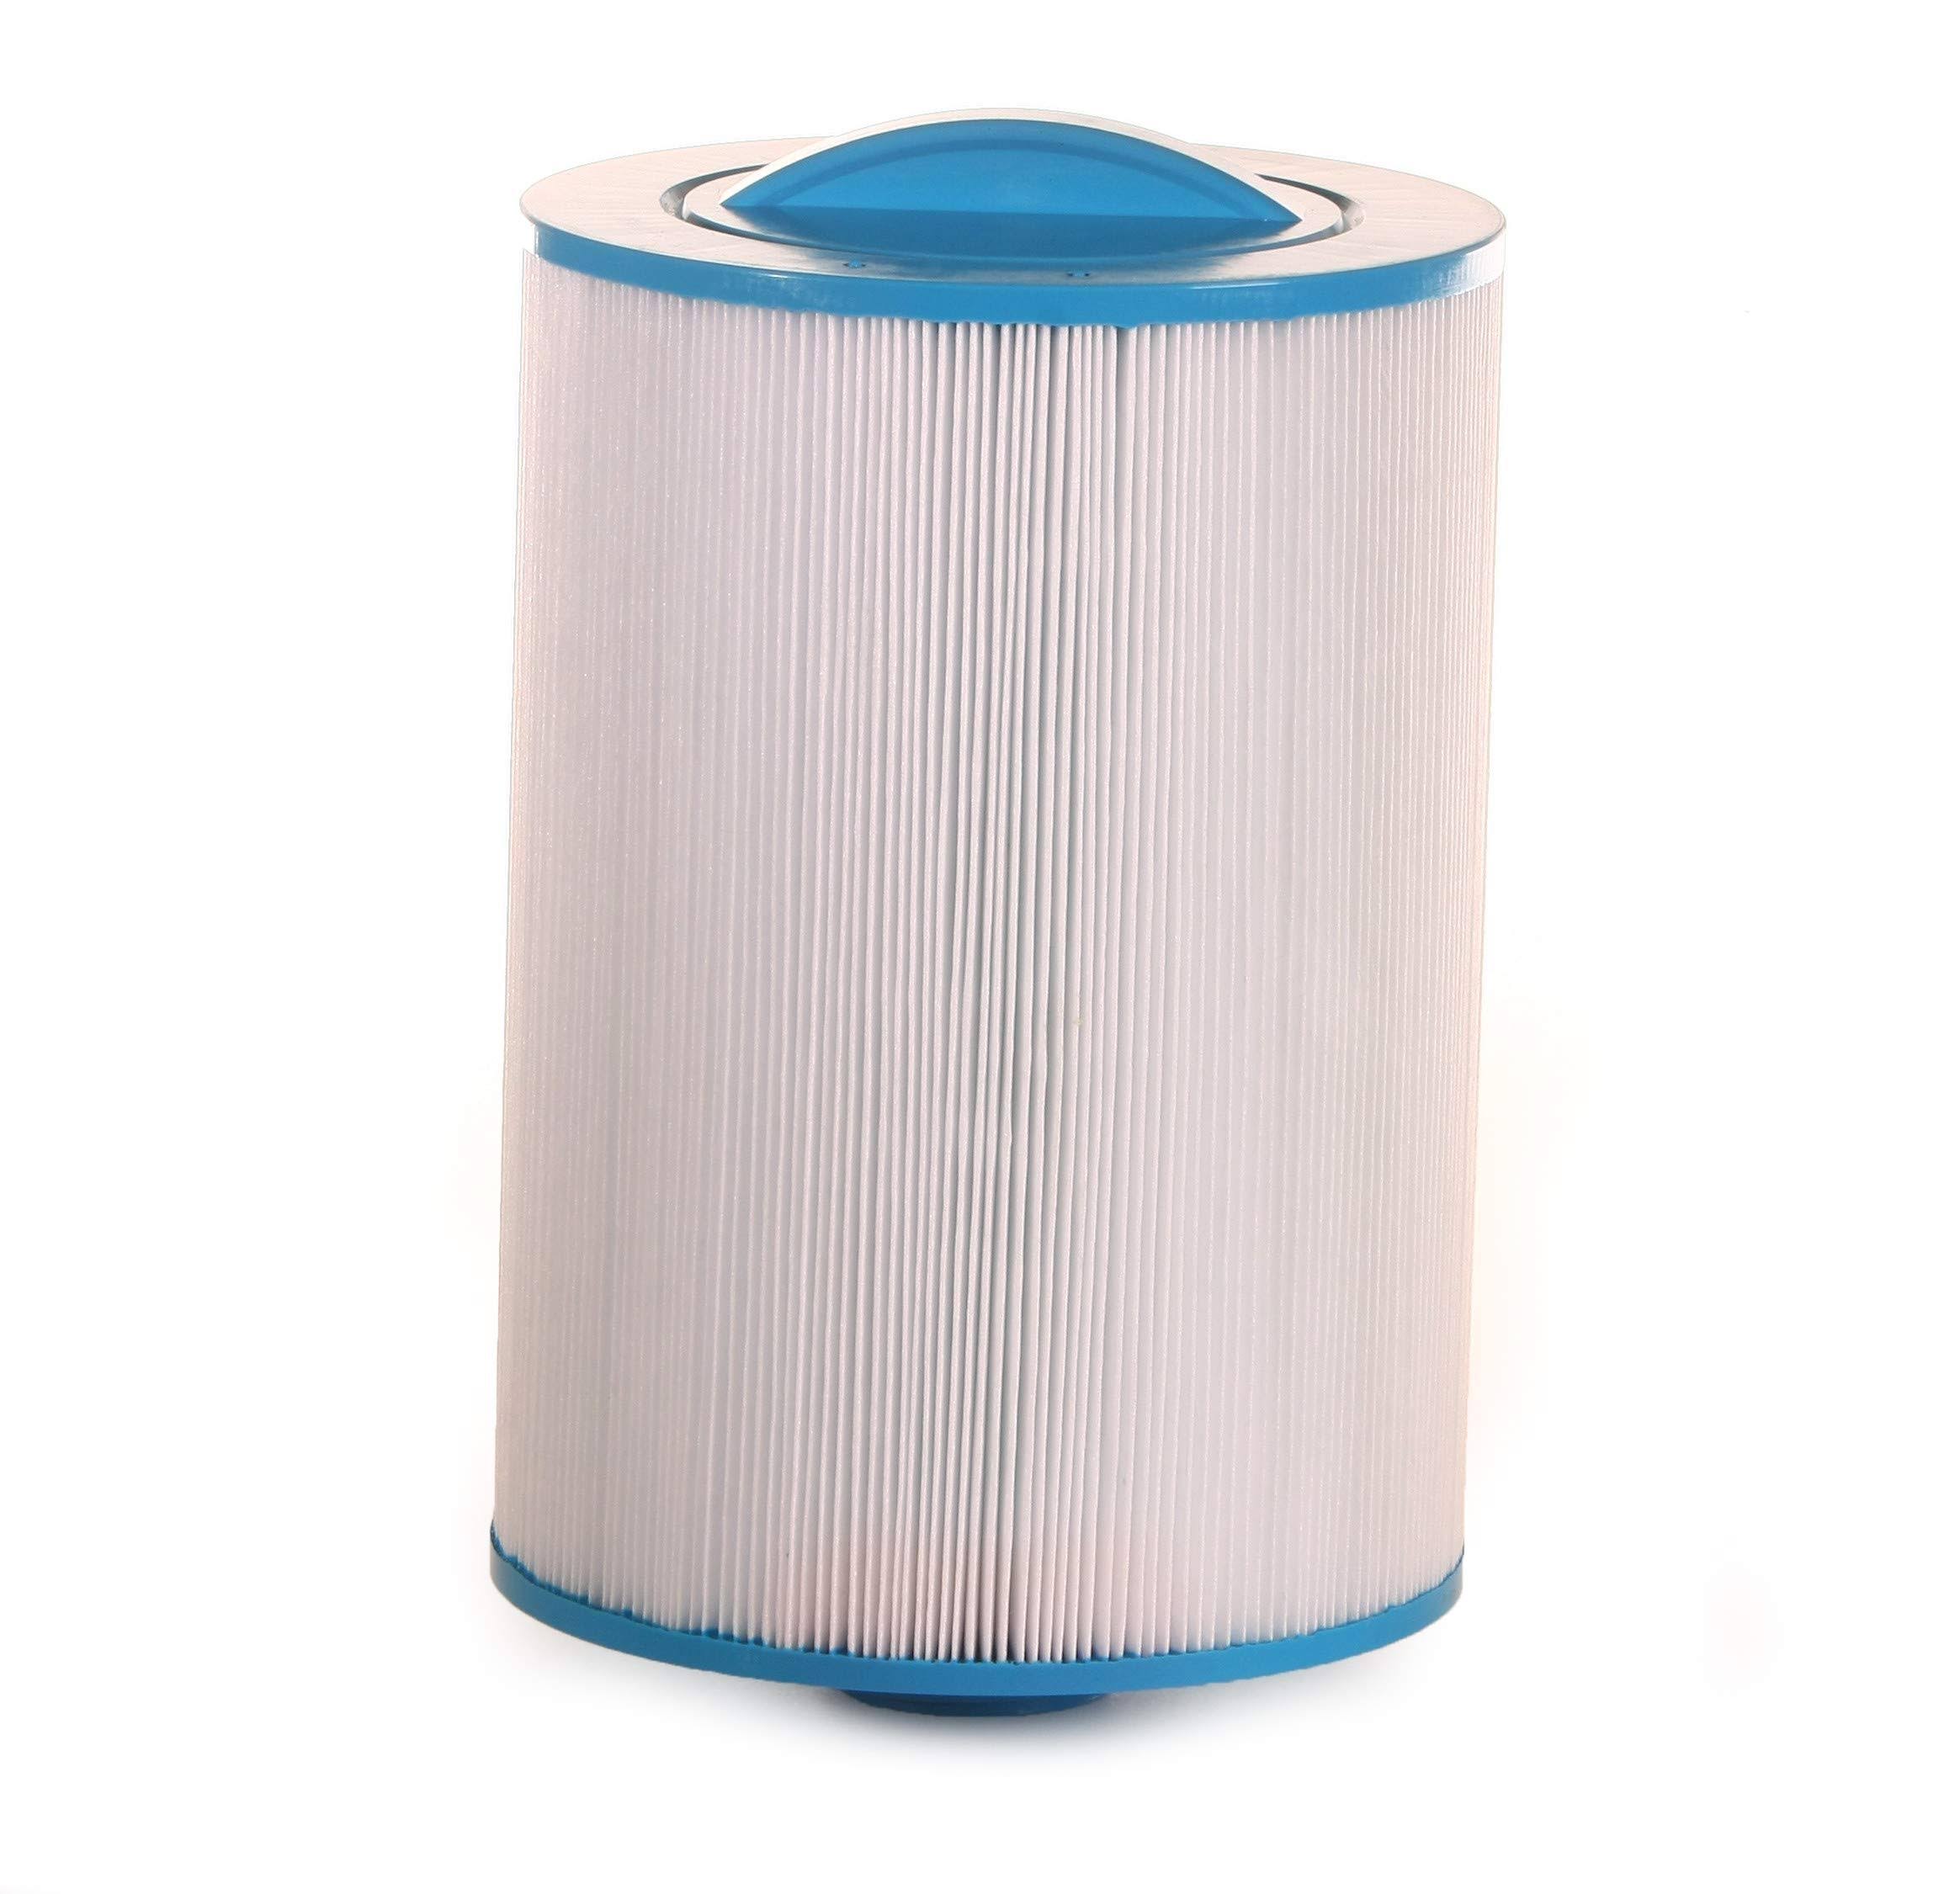 Baleen Filters 45 sq. ft. Pool Filter Replaces Unicel 6CH-940, Pleatco PWW50P3, Filbur FC-0359 Pool and Spa Filter Cartridges Model: AK-9019